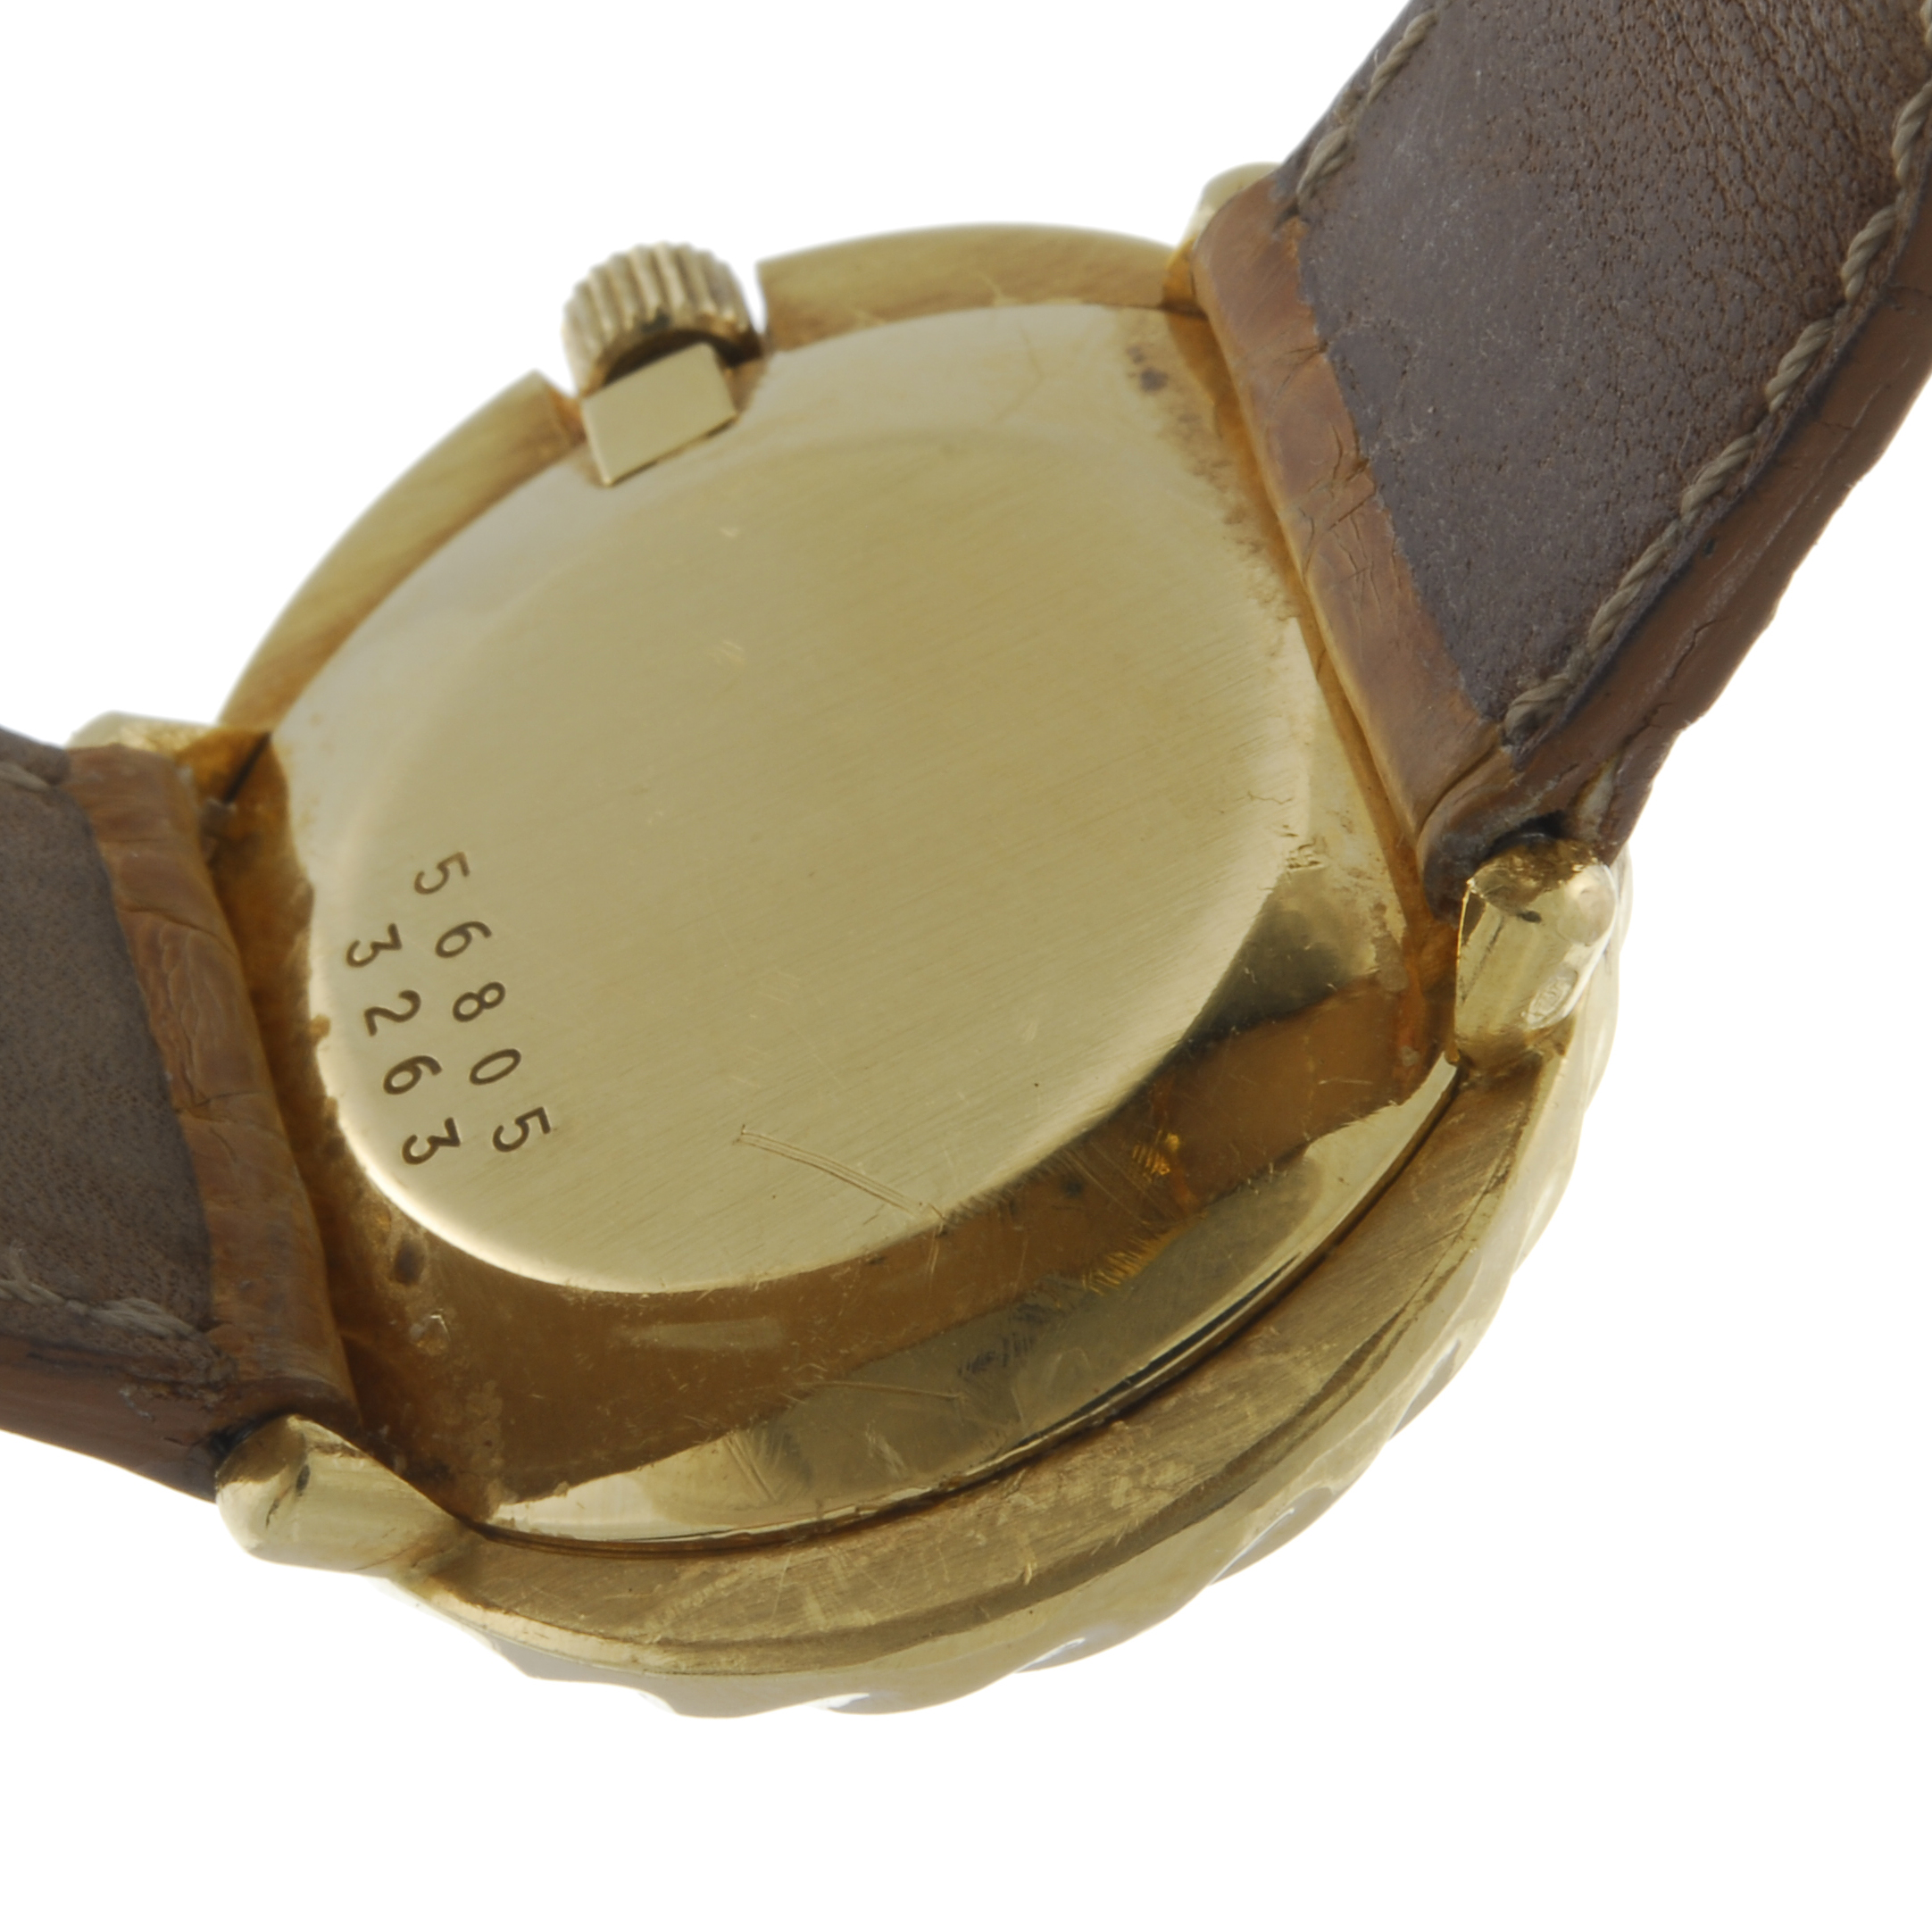 MONTRE ROYALE - a gentleman's wrist watch. Yellow metal case, stamped 18k 0.750. Reference 3263, - Image 2 of 4